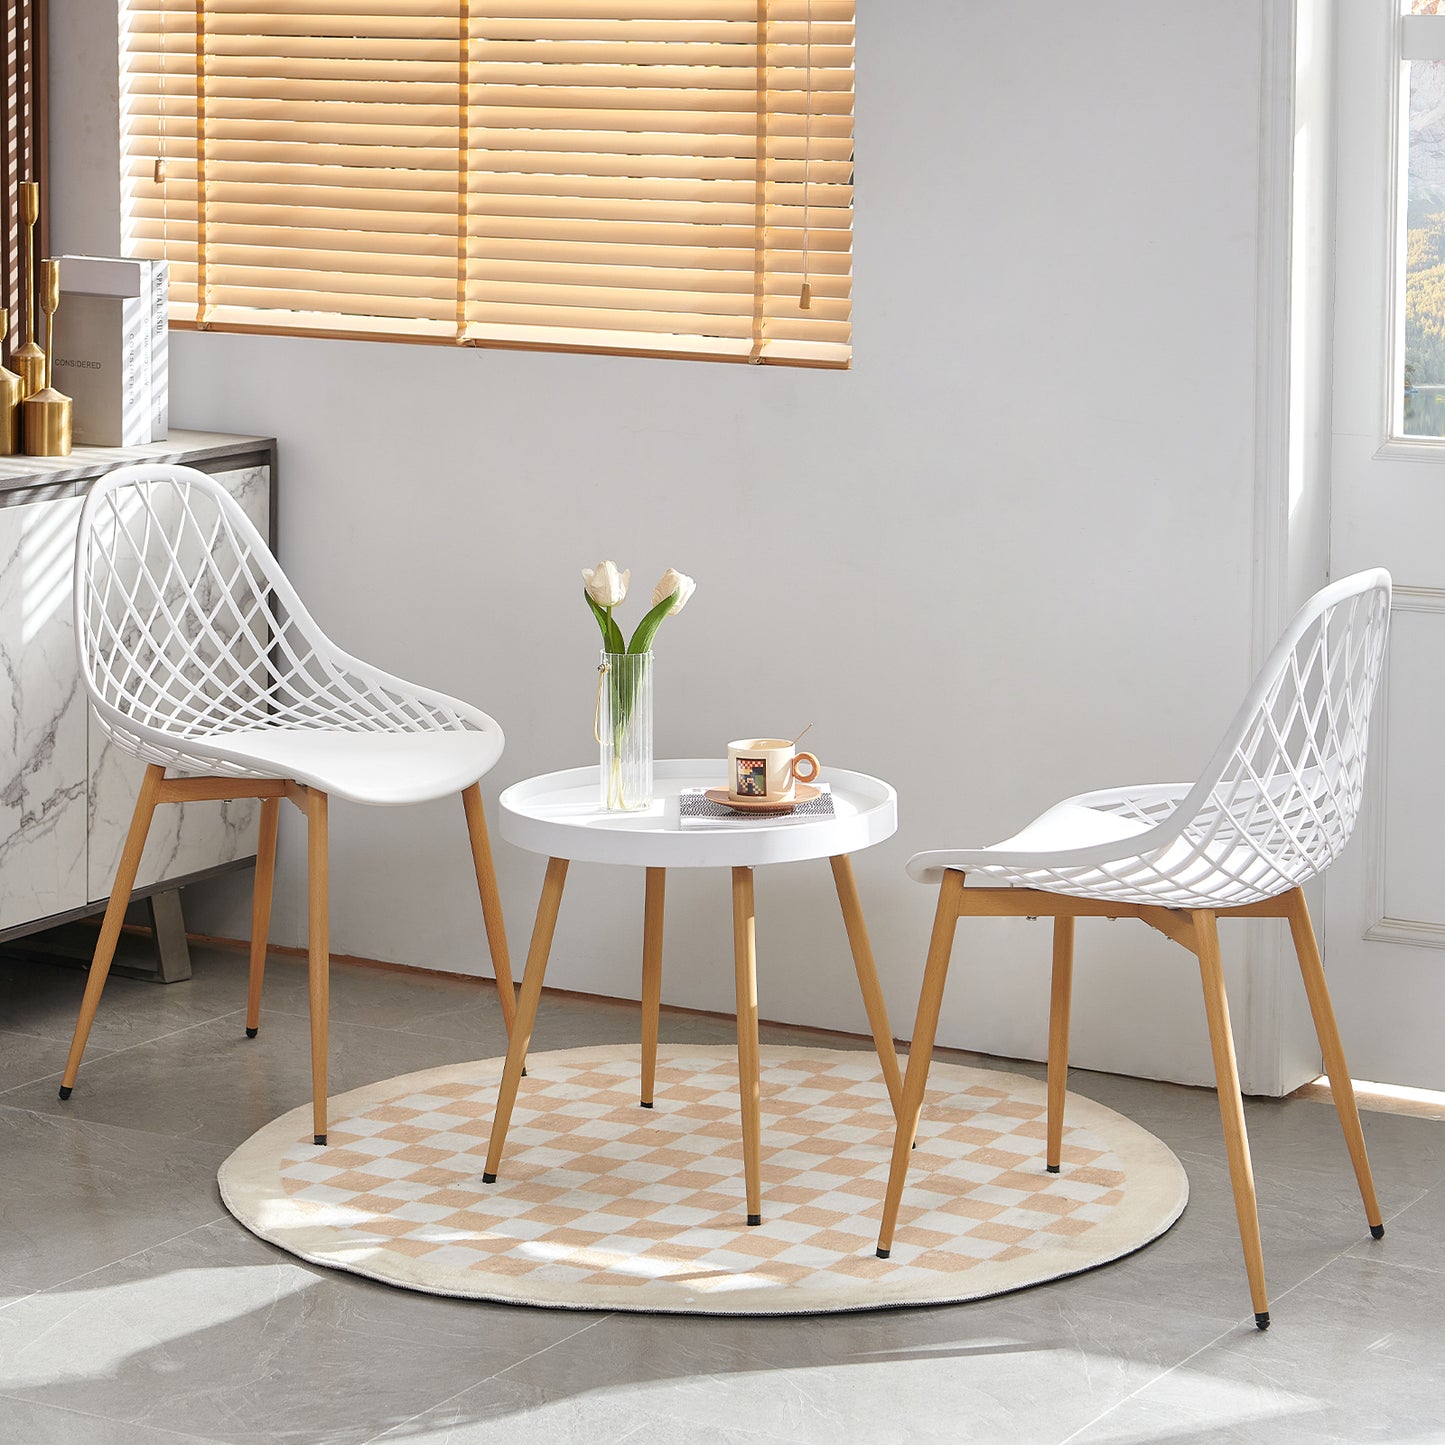 MILAN Hollow Tables and Chairs Iron Legs - White